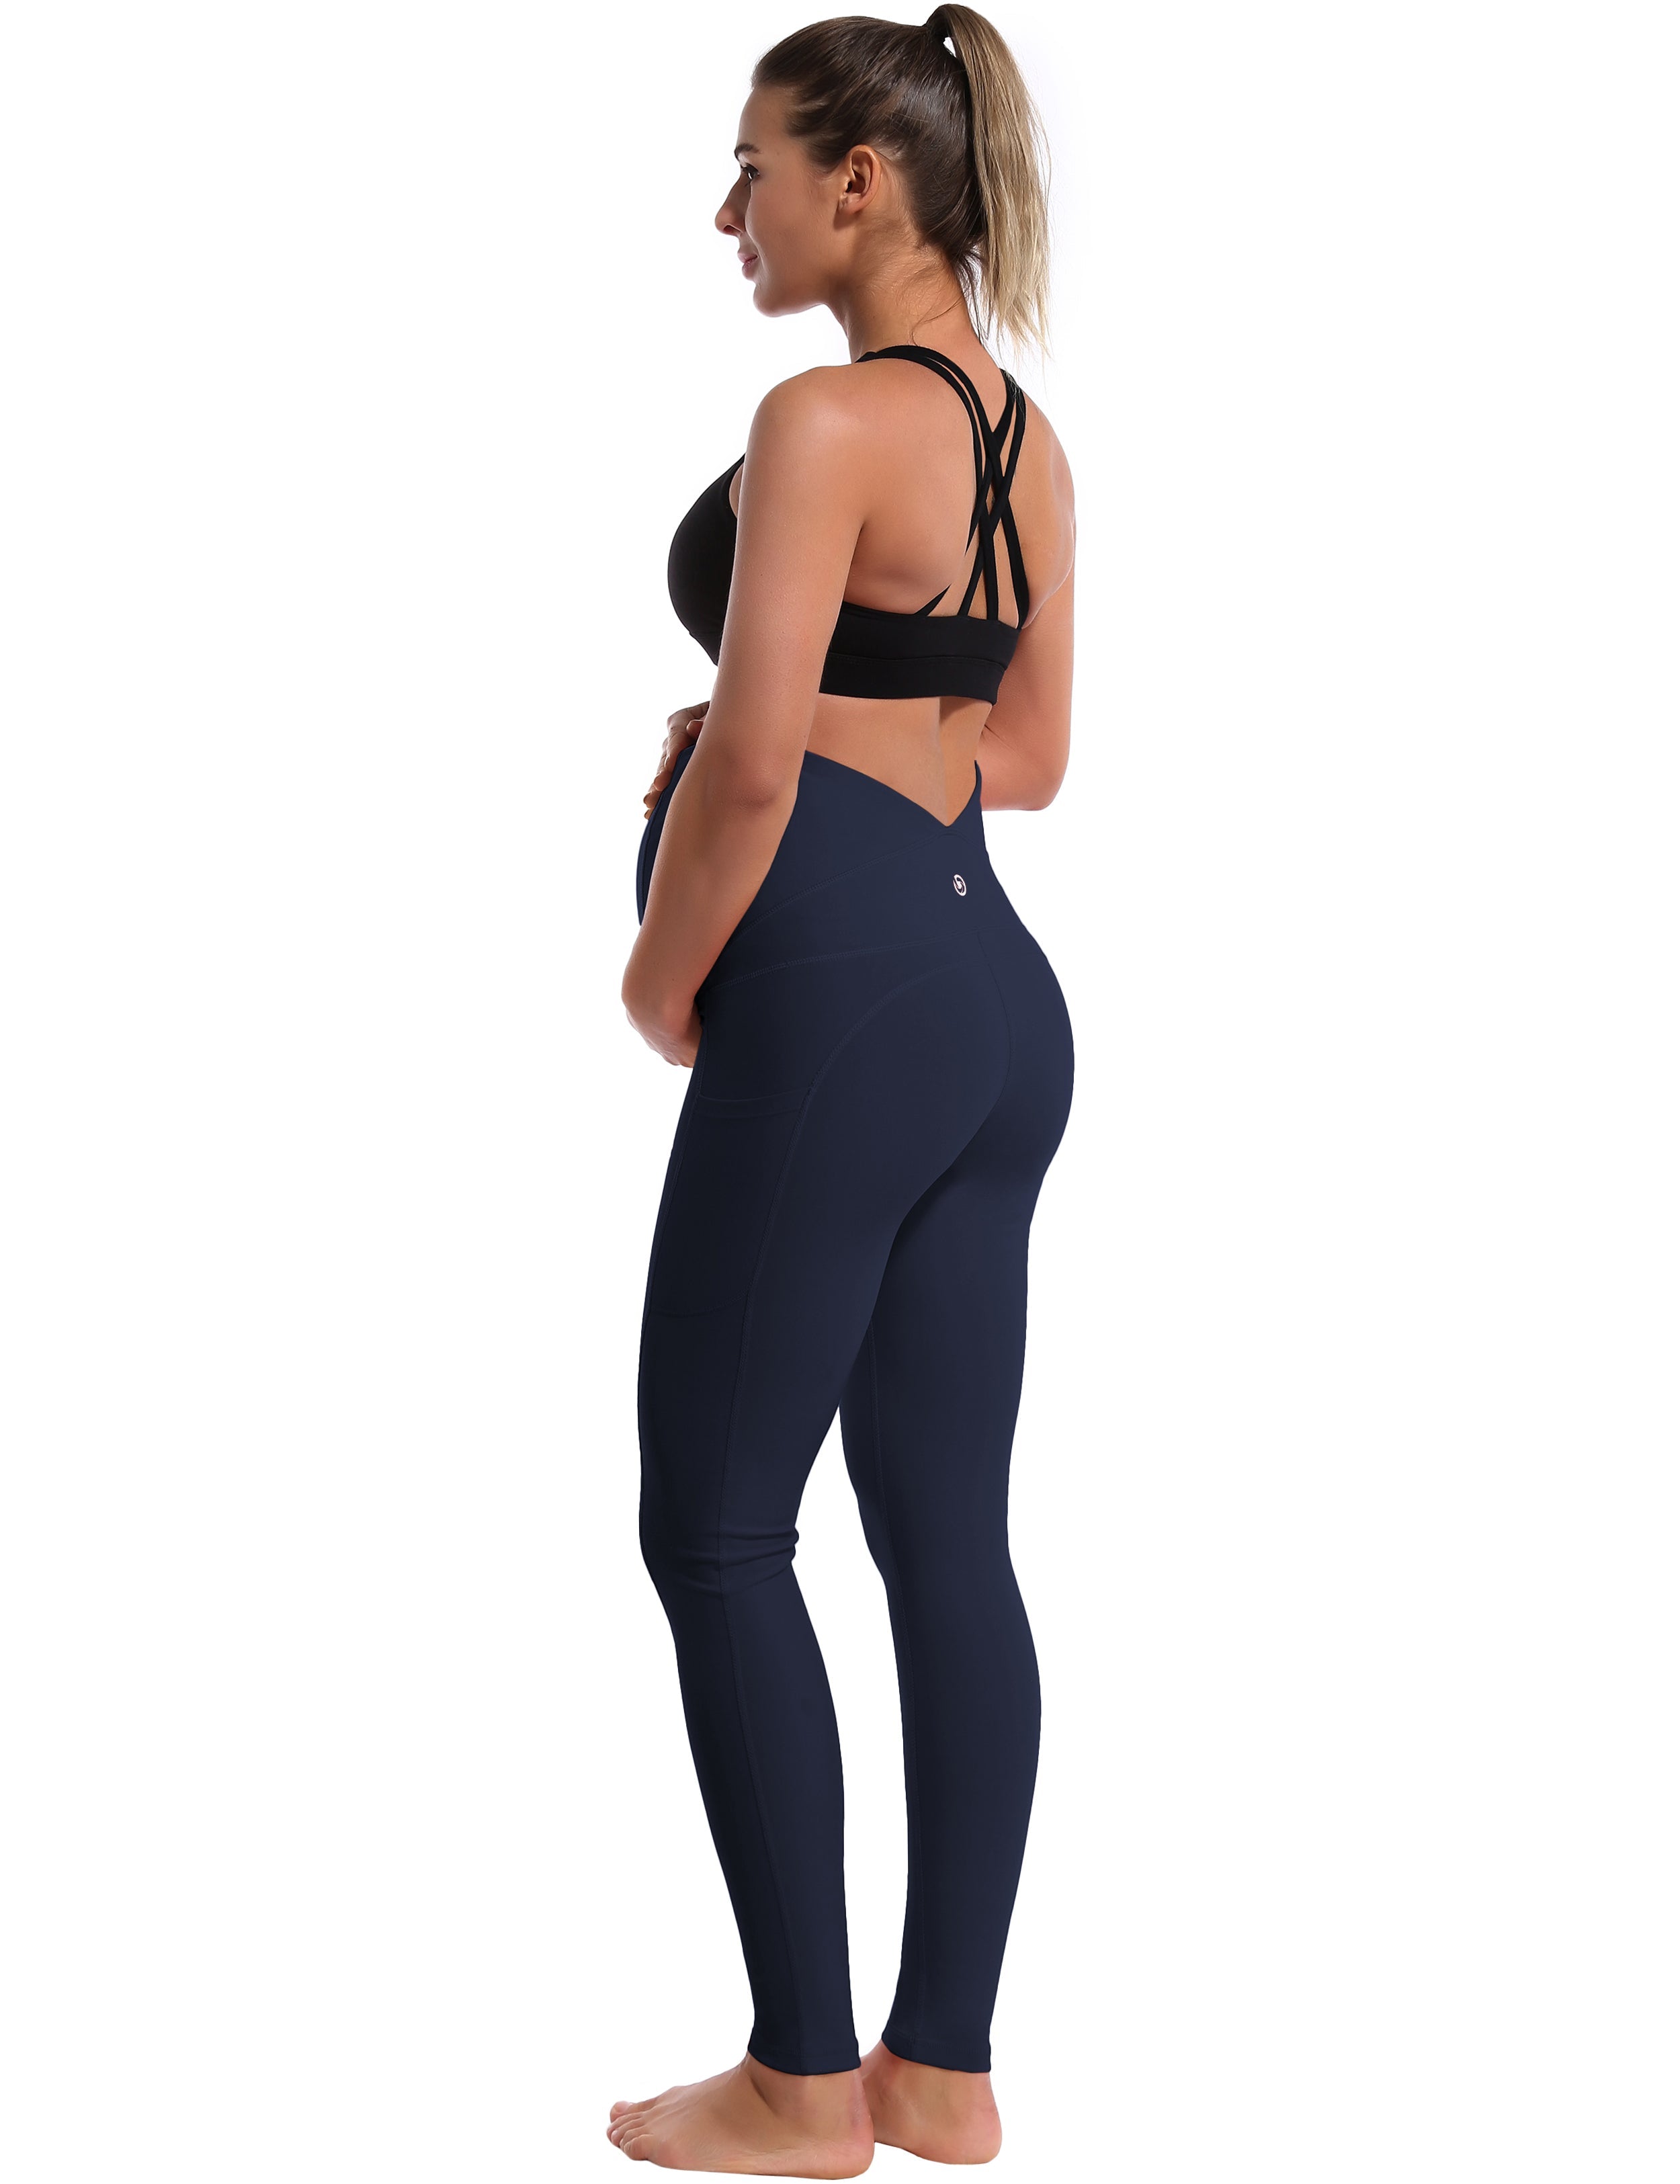 26" Side Pockets Maternity Tall Size Pants darknavy 87%Nylon/13%Spandex Softest-ever fabric High elasticity 4-way stretch Fabric doesn't attract lint easily No see-through Moisture-wicking Machine wash